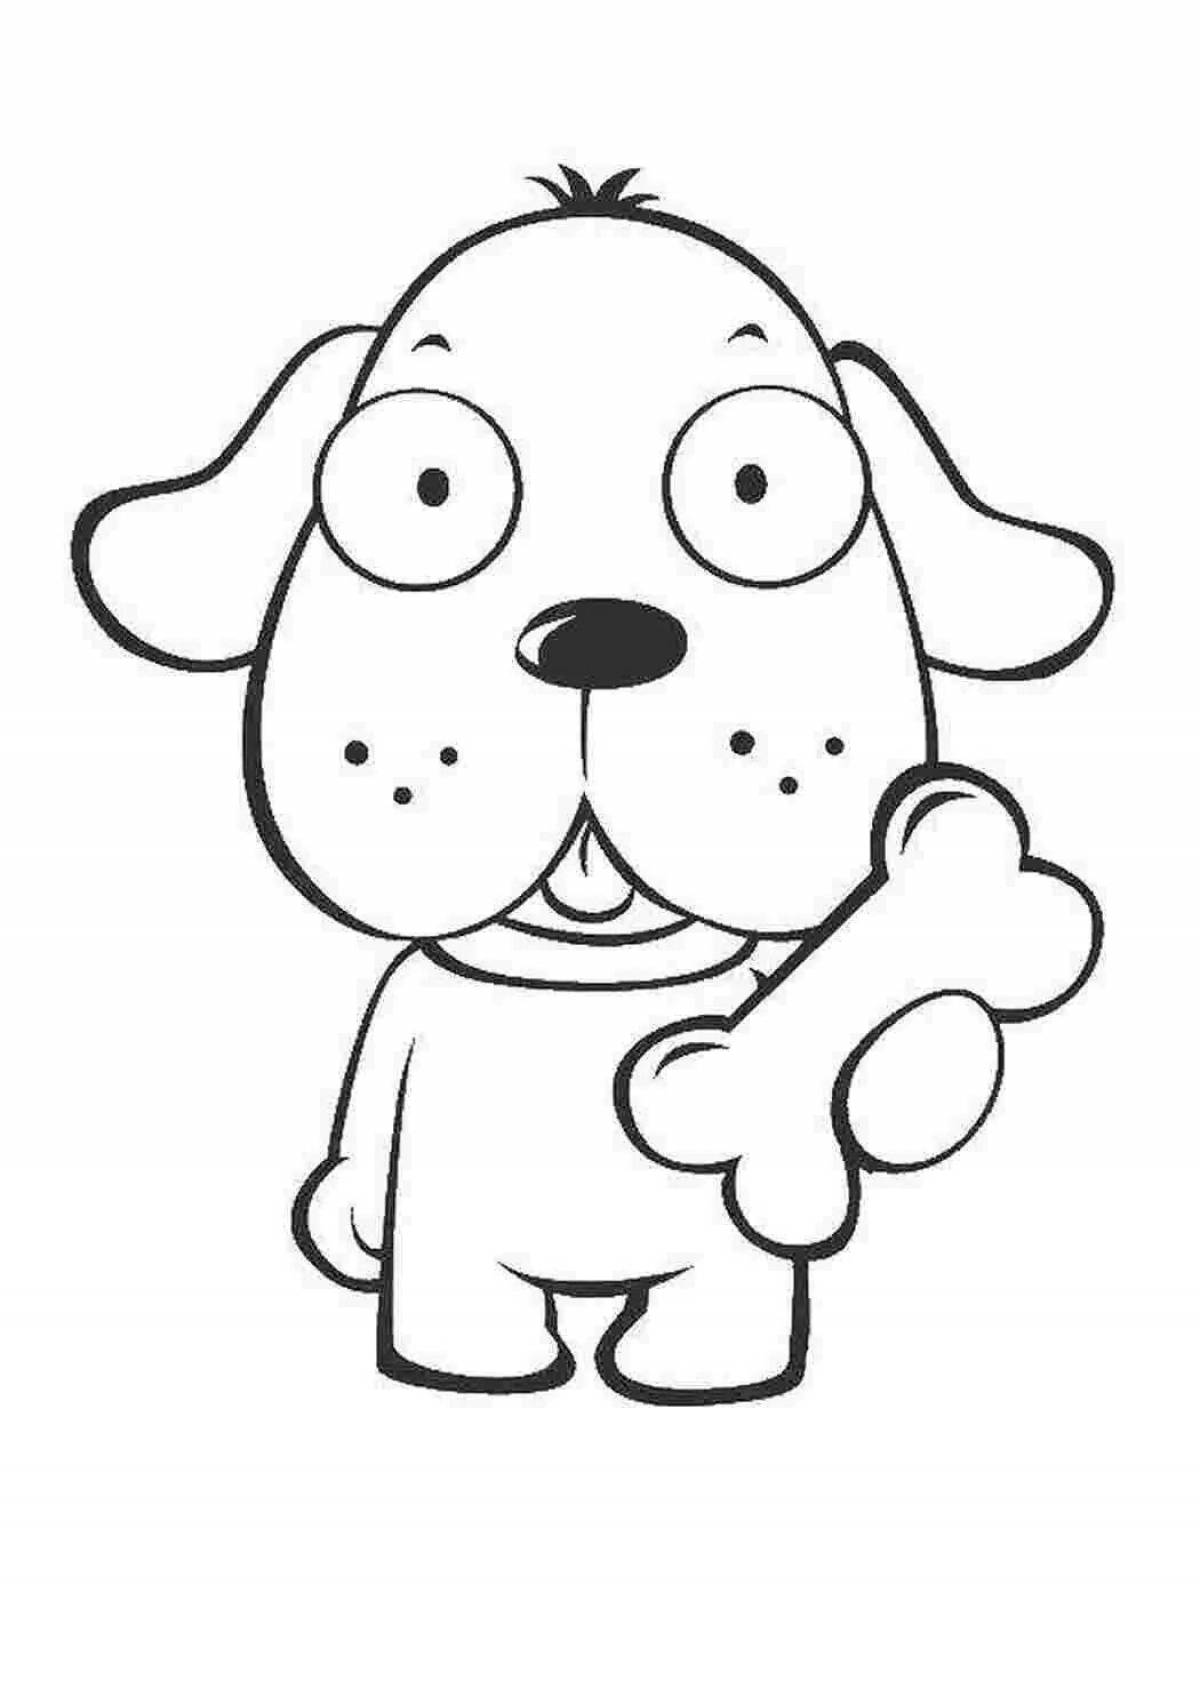 Coloring book excited cartoon dog